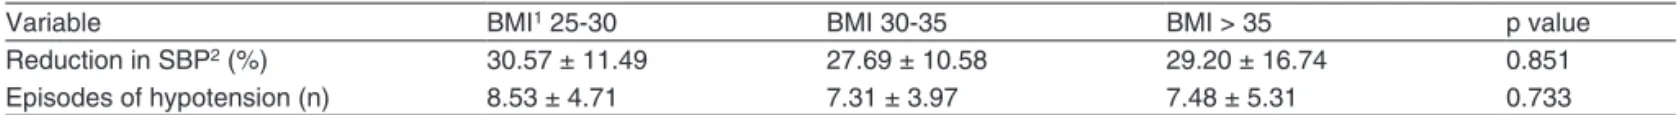 Table I – episodes of Hypotension or Reduction in SBP in Relation to Baseline among the Subgroups